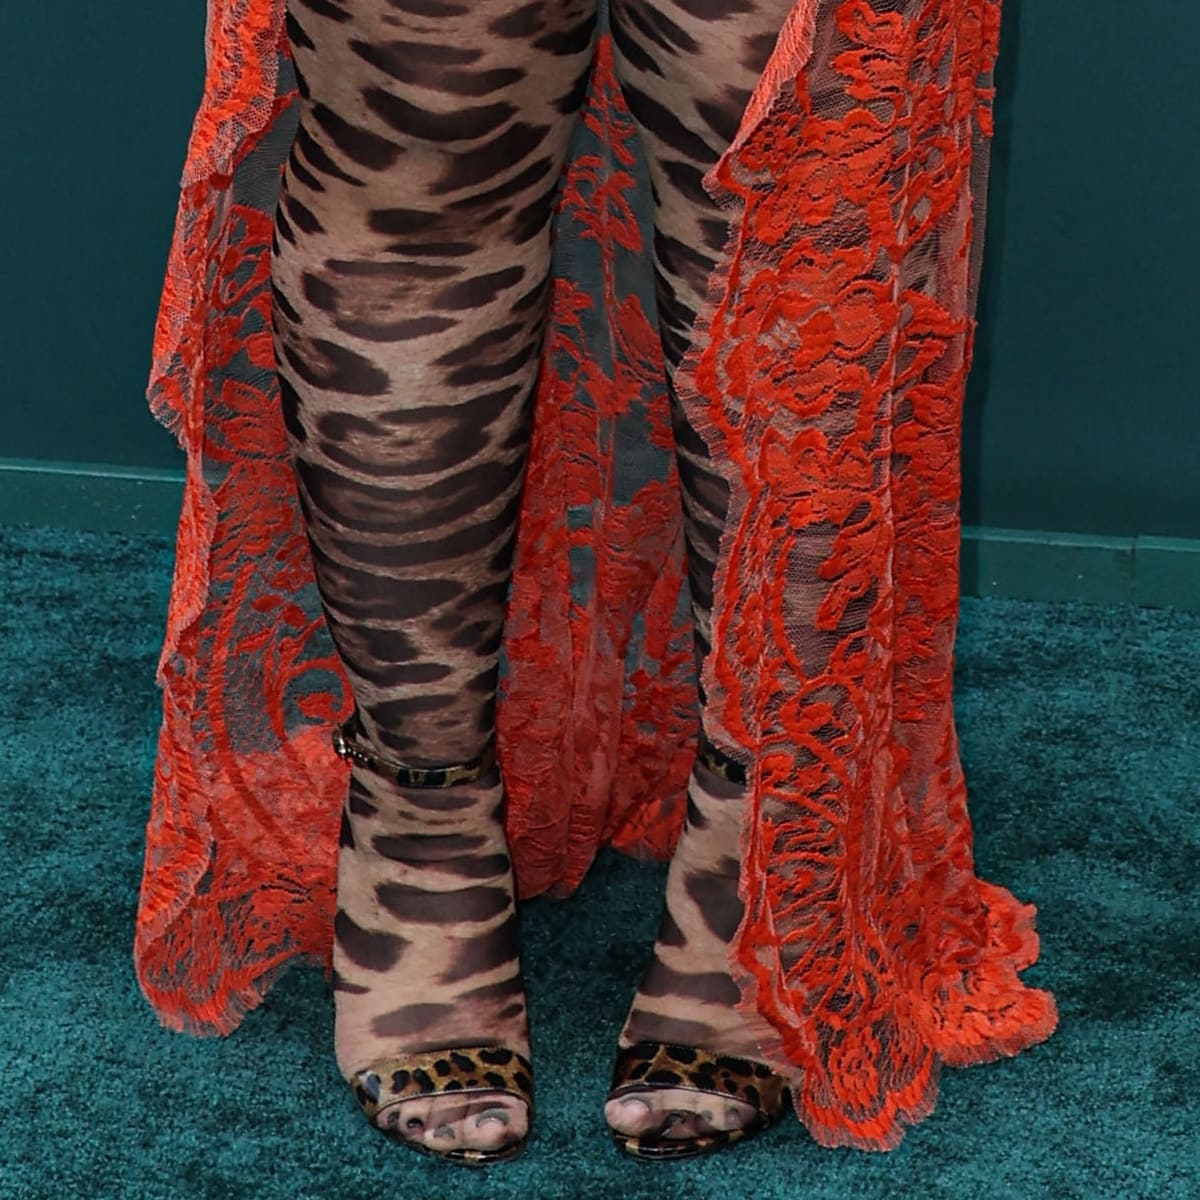 Pairing leopard-print tights with strappy open-toe sandals, Ice Spice adds a touch of 2010s retro chic